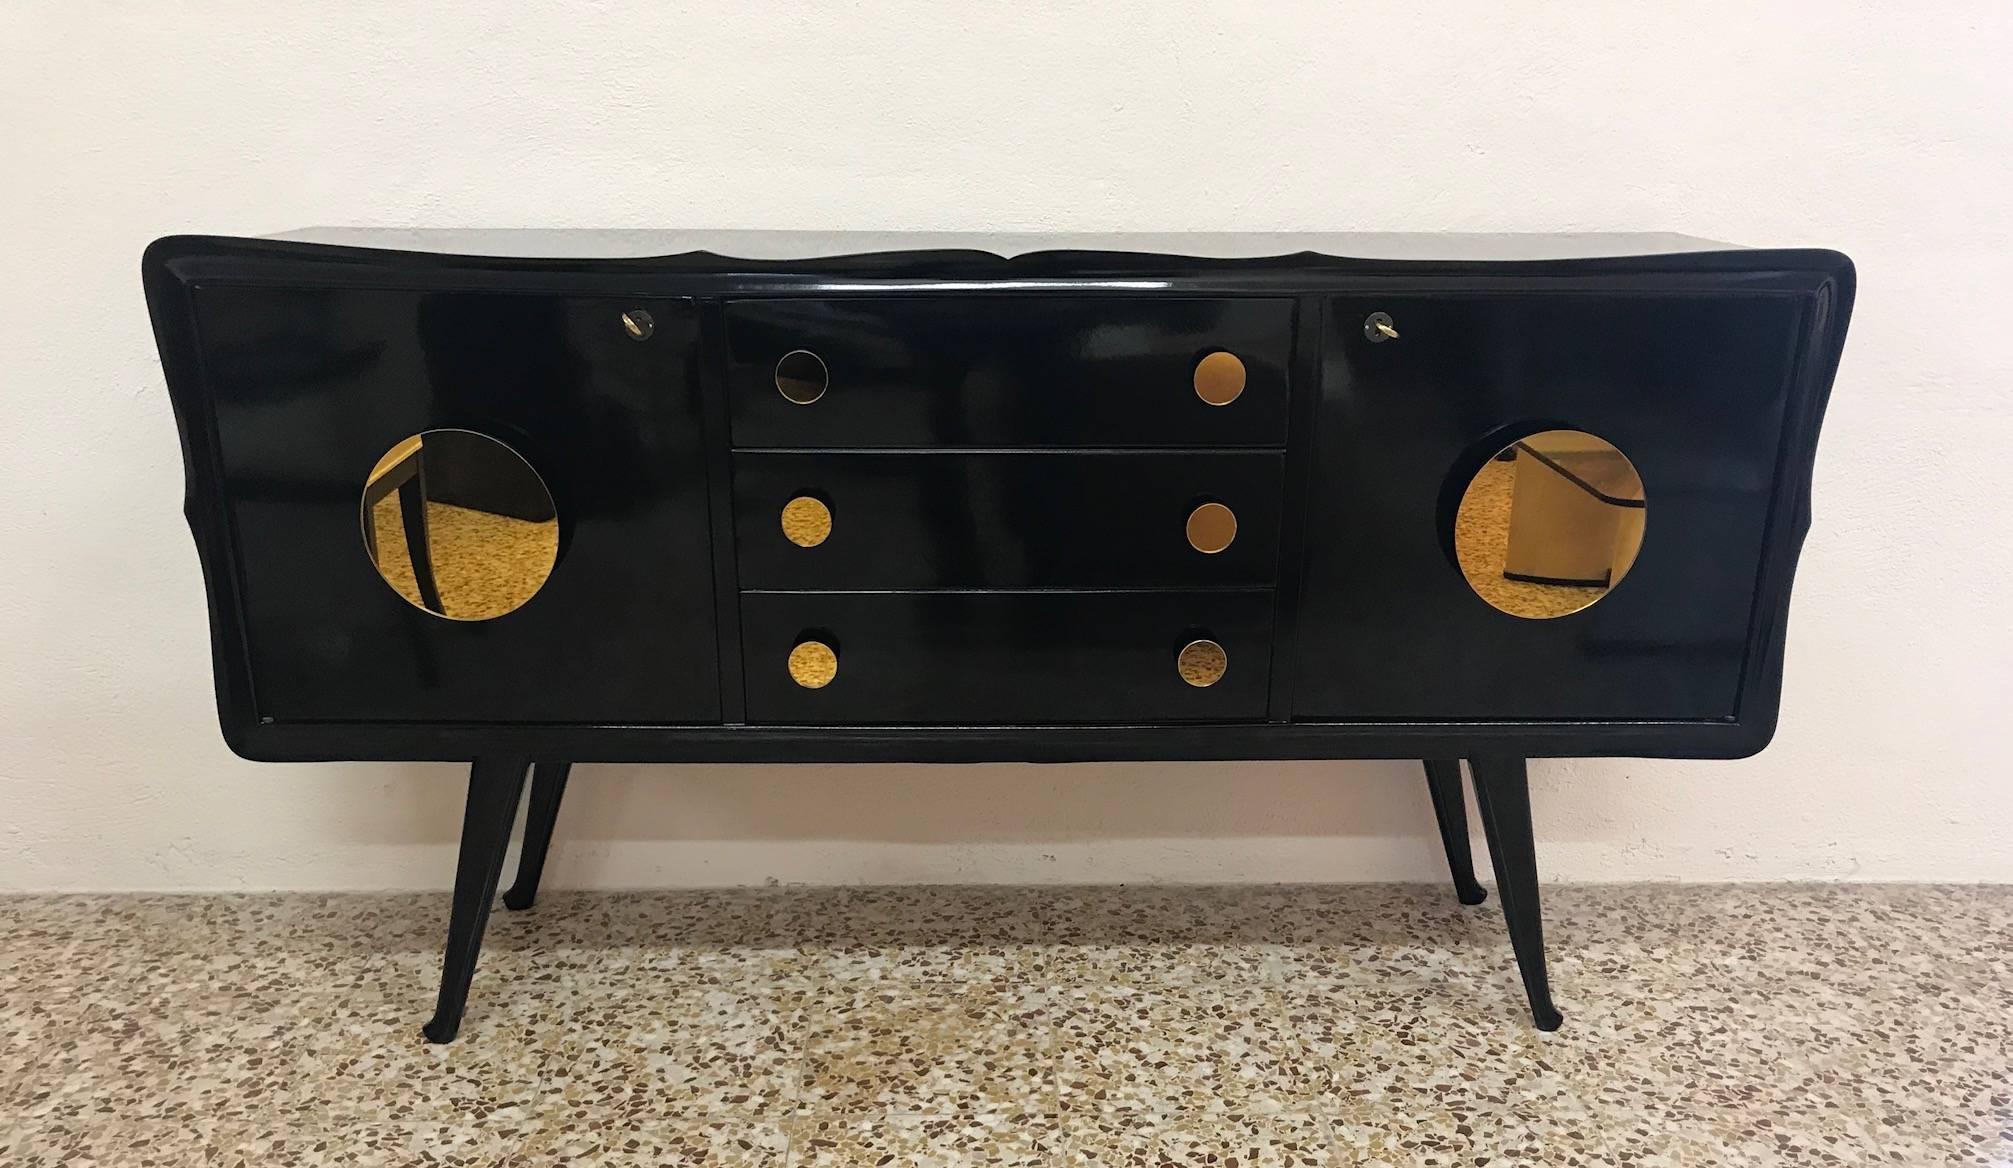 This sideboard was produced in Italy in the 1950s.
The structure is black lacquered and brass keys.
The front is embellished with unique round gold-colored mirrors.